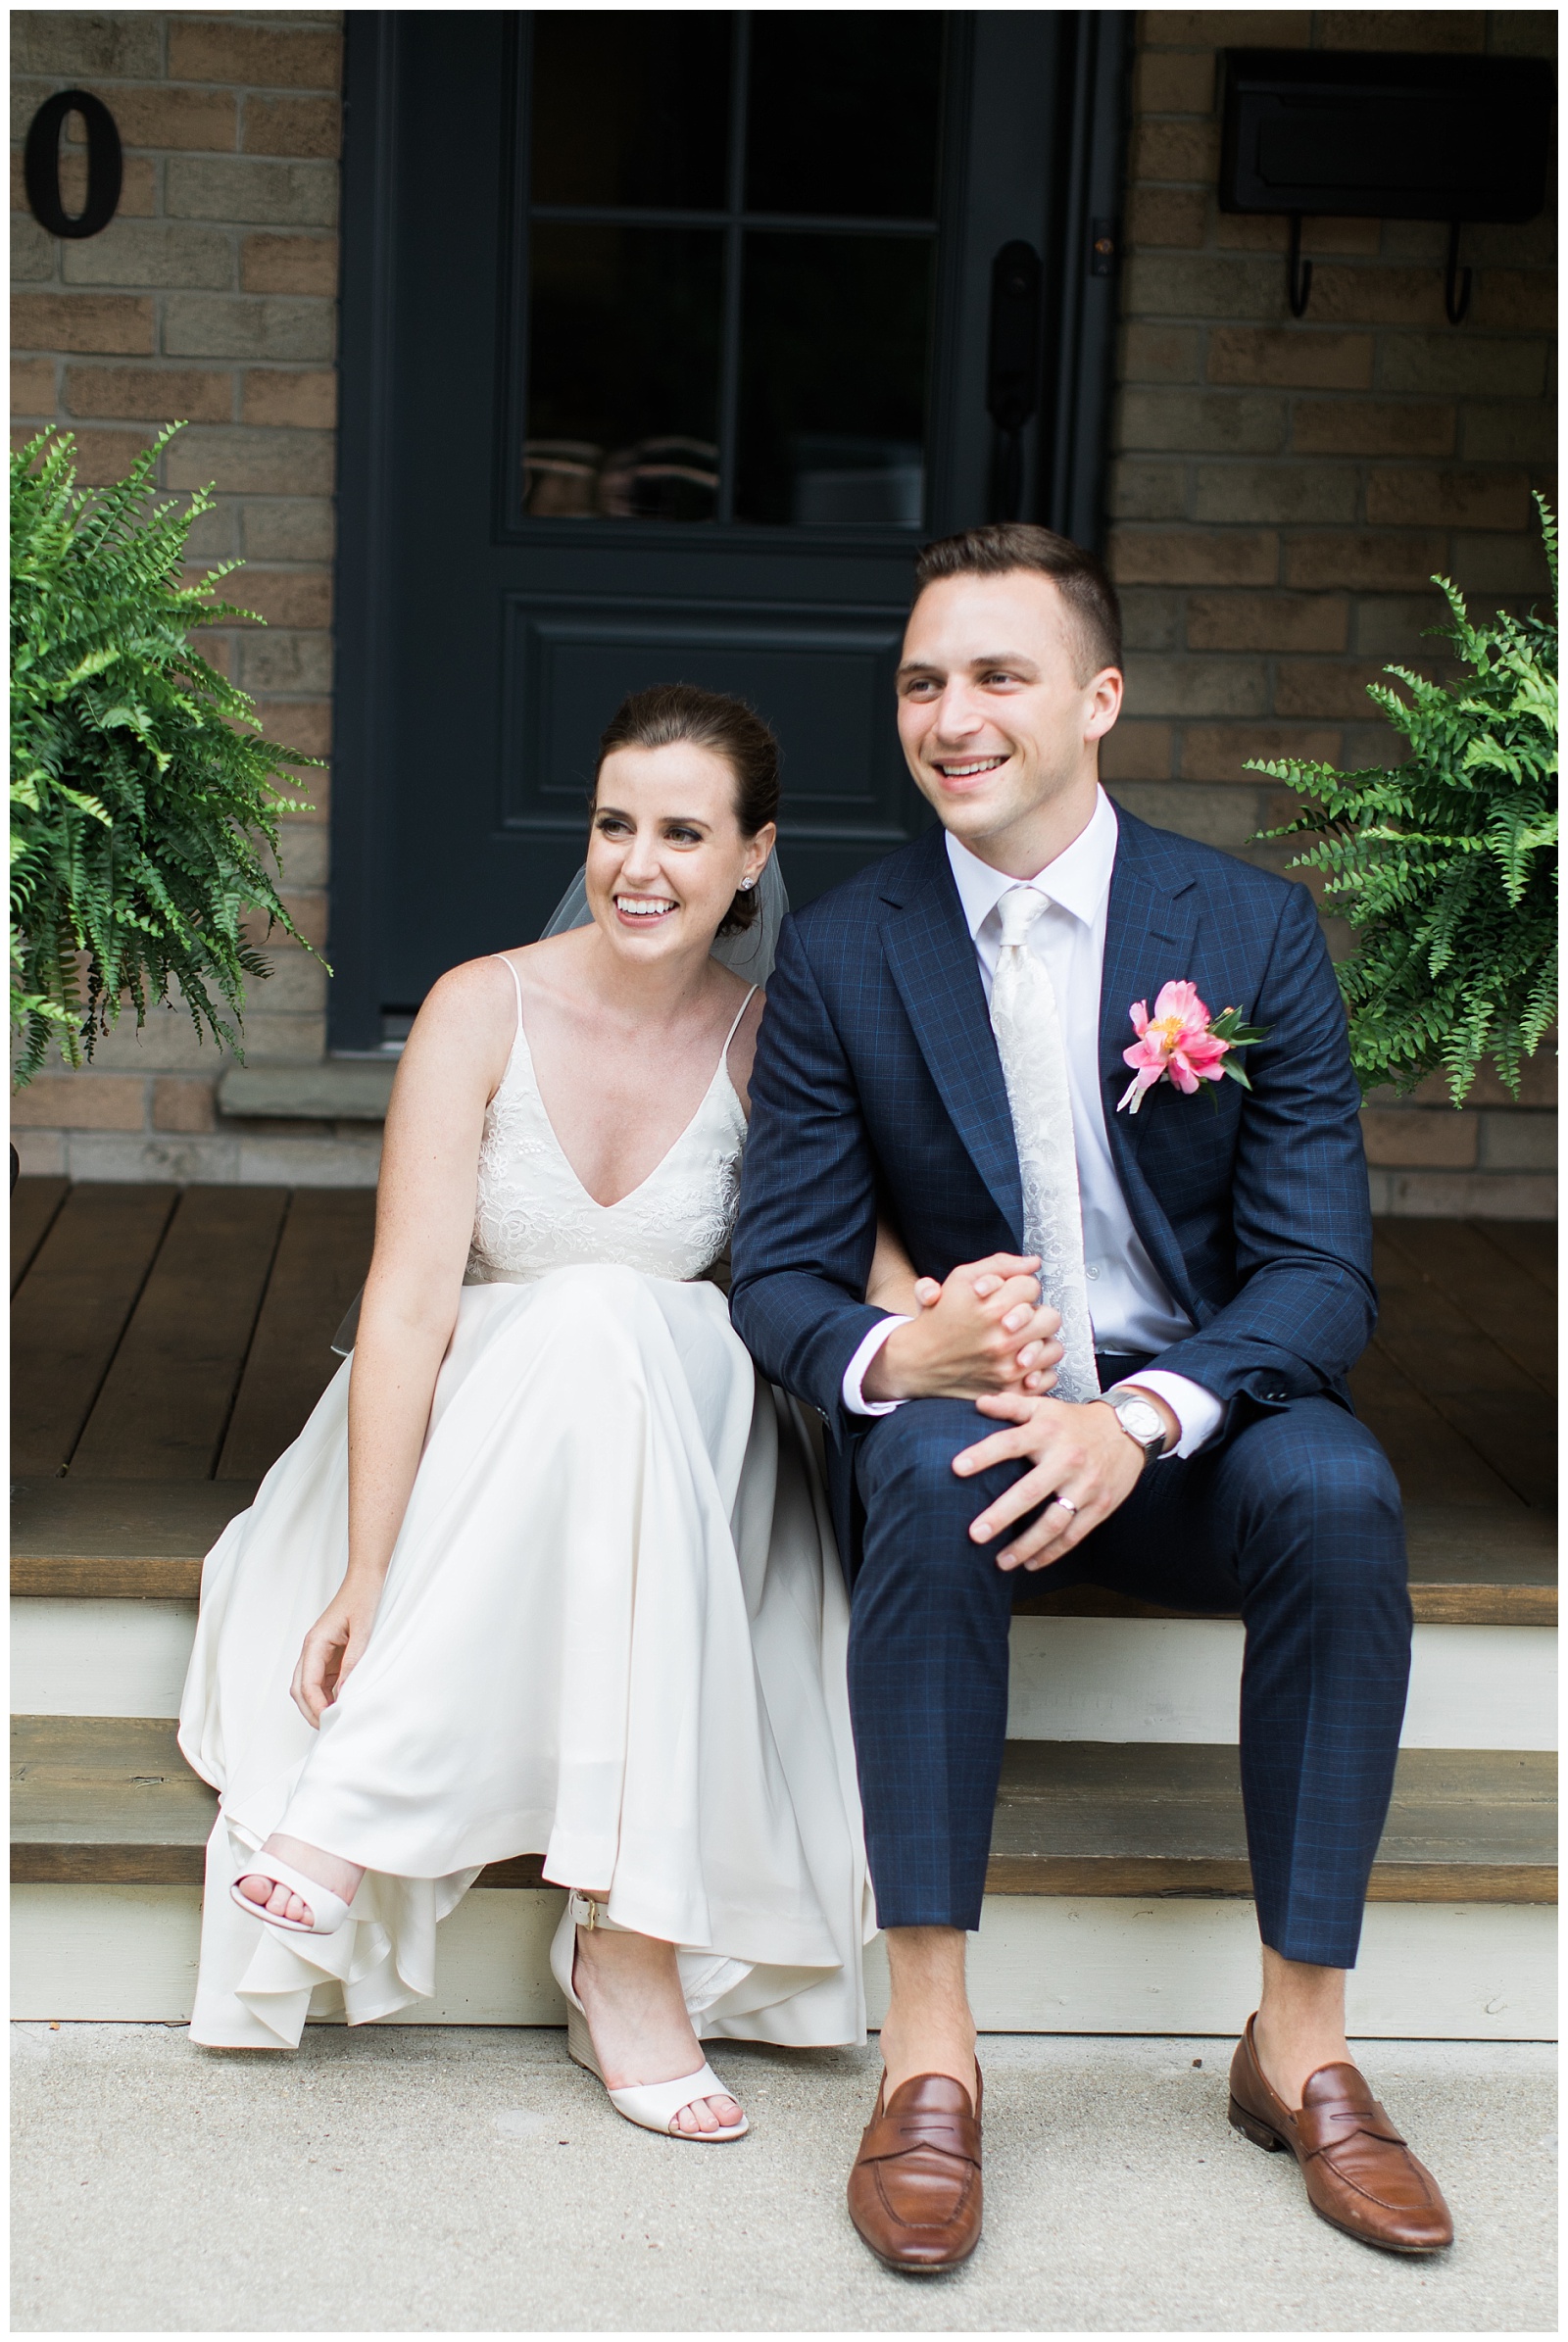 Bride and Groom holding hands and sitting on porch at Guelph Ontario Wedding | Ontario Wedding Photographer | Toronto Wedding Photographer | 3photography